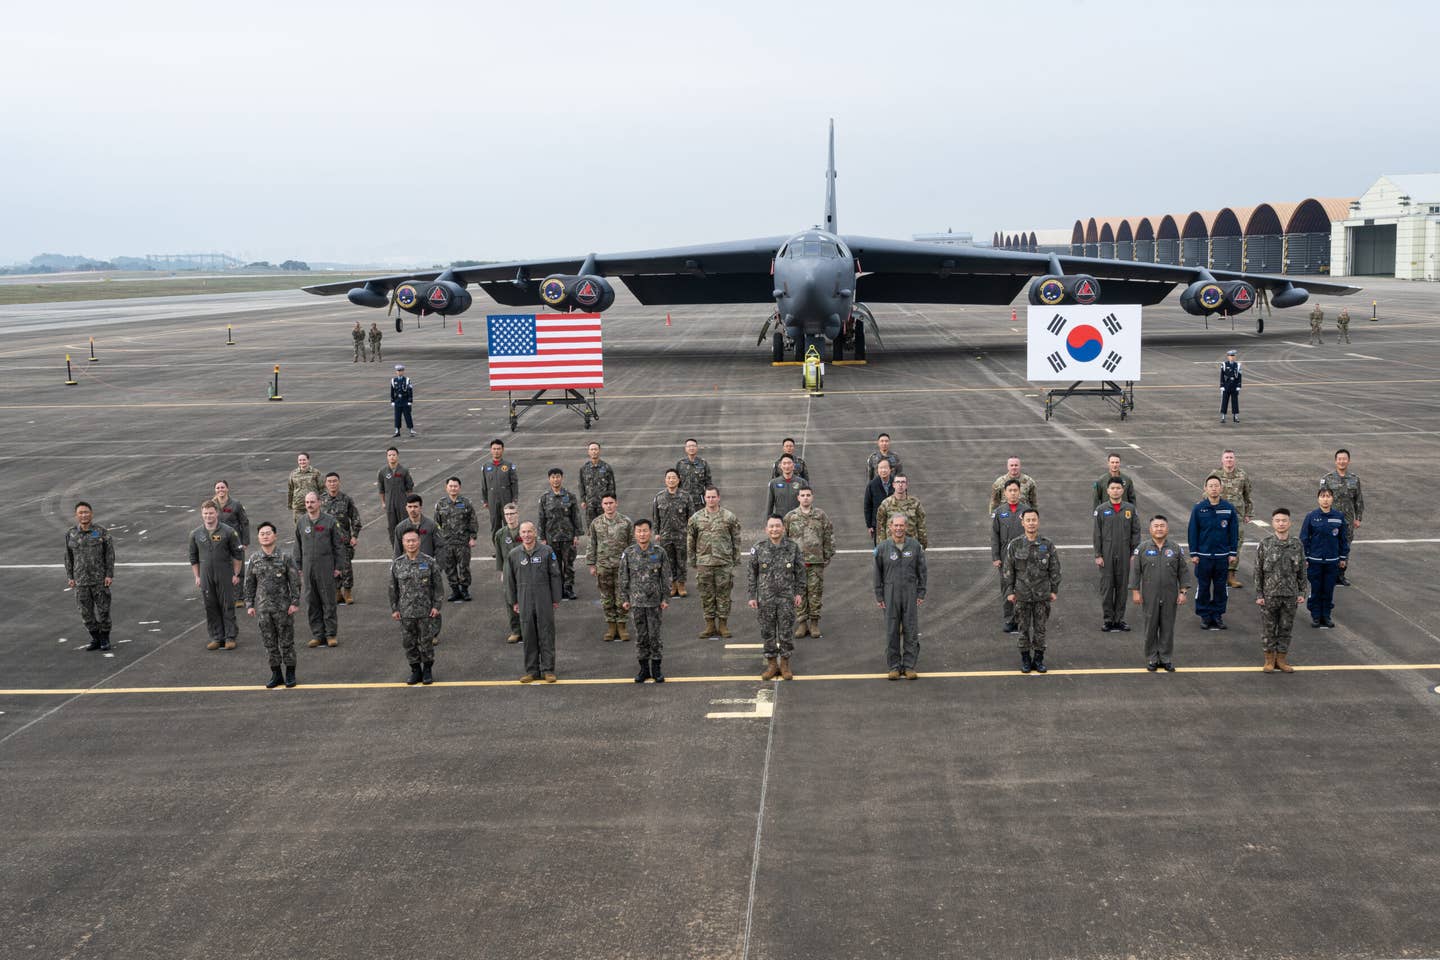 Service members from the U.S. Air Force and the Republic of Korea Air Force pose for a group photo in front of a B-52H Stratofortress from the 96th Bomb Squadron at Barksdale Air Force Base, Louisiana in the Republic of Korea, October 19, 2023. The U.S. B-52 deployed to the Korean peninsula to participate in the 2023 Seoul International Aerospace and Defense Exhibition, scheduled for Oct. 17-22, in celebration of the Republic of Korea and the U.S. Alliance’s 70th Anniversary. Support to airshows and other regional events allows the U.S. to demonstrate its commitment to the stability and security of the Indo-Pacific region, promote standardization and interoperability of equipment, and display capabilities critical to the success of military operations. (U.S. Air Force photo by Airman 1st Class Nicole Ledbetter)